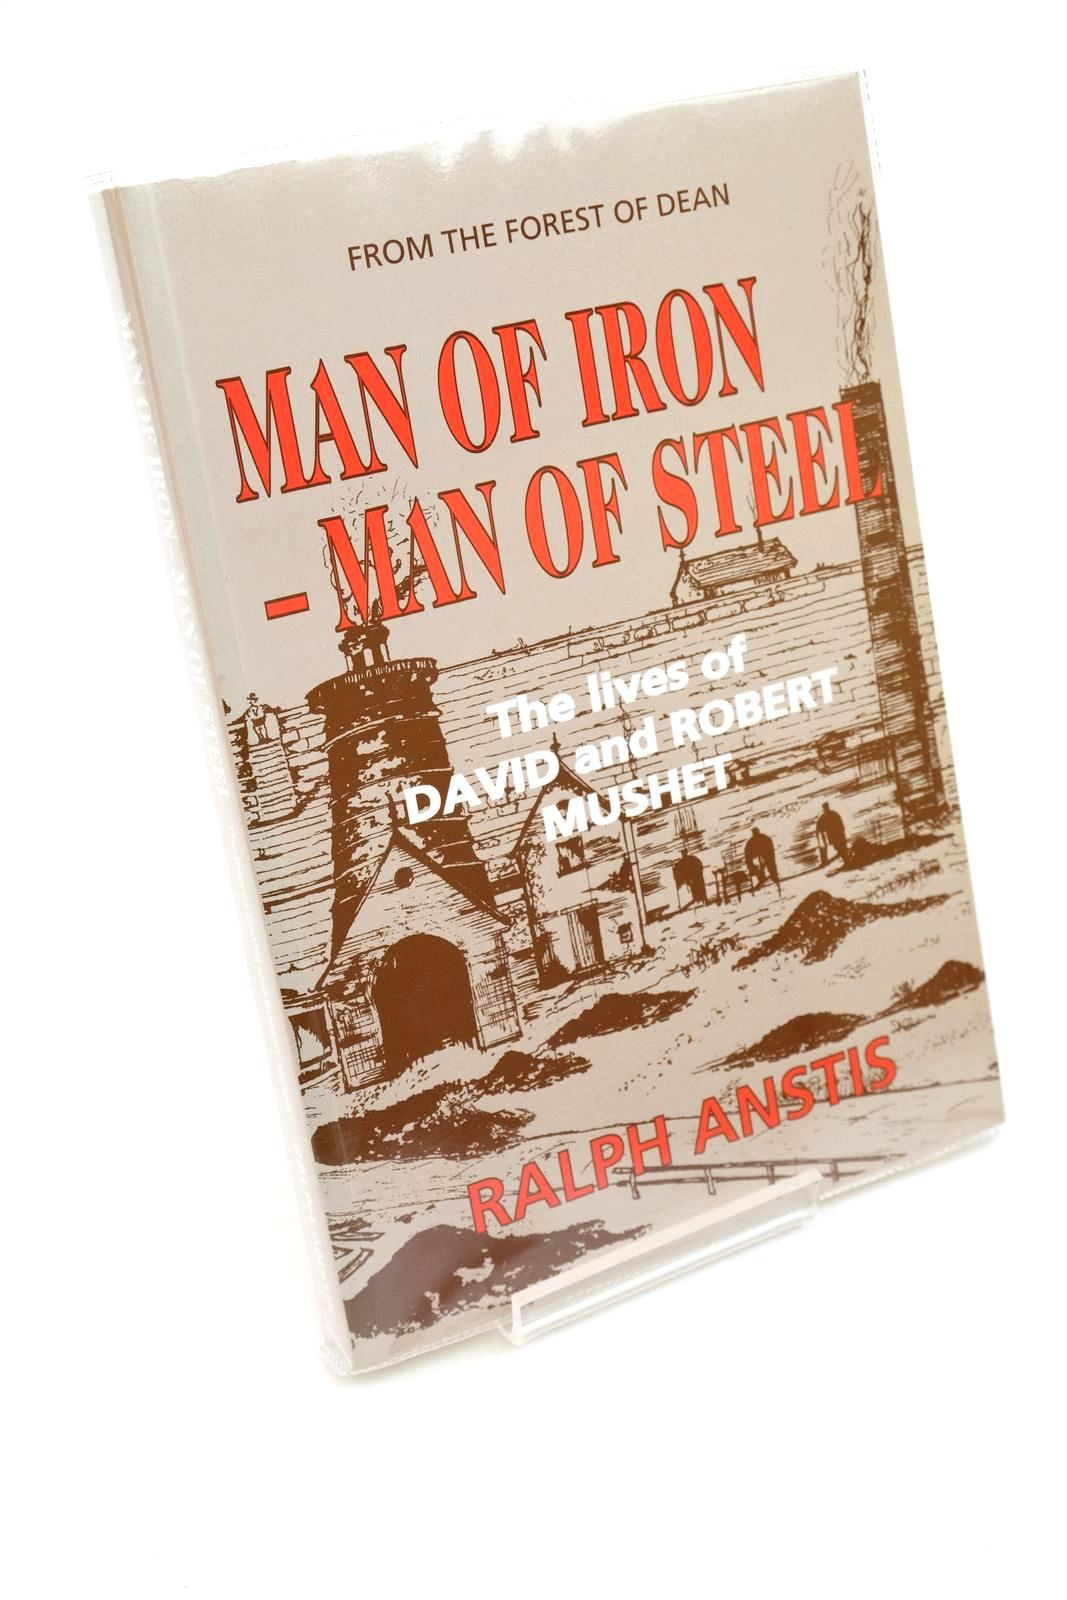 Photo of MAN OF IRON - MAN OF STEEL written by Anstis, Ralph published by Albion House (STOCK CODE: 1323133)  for sale by Stella & Rose's Books